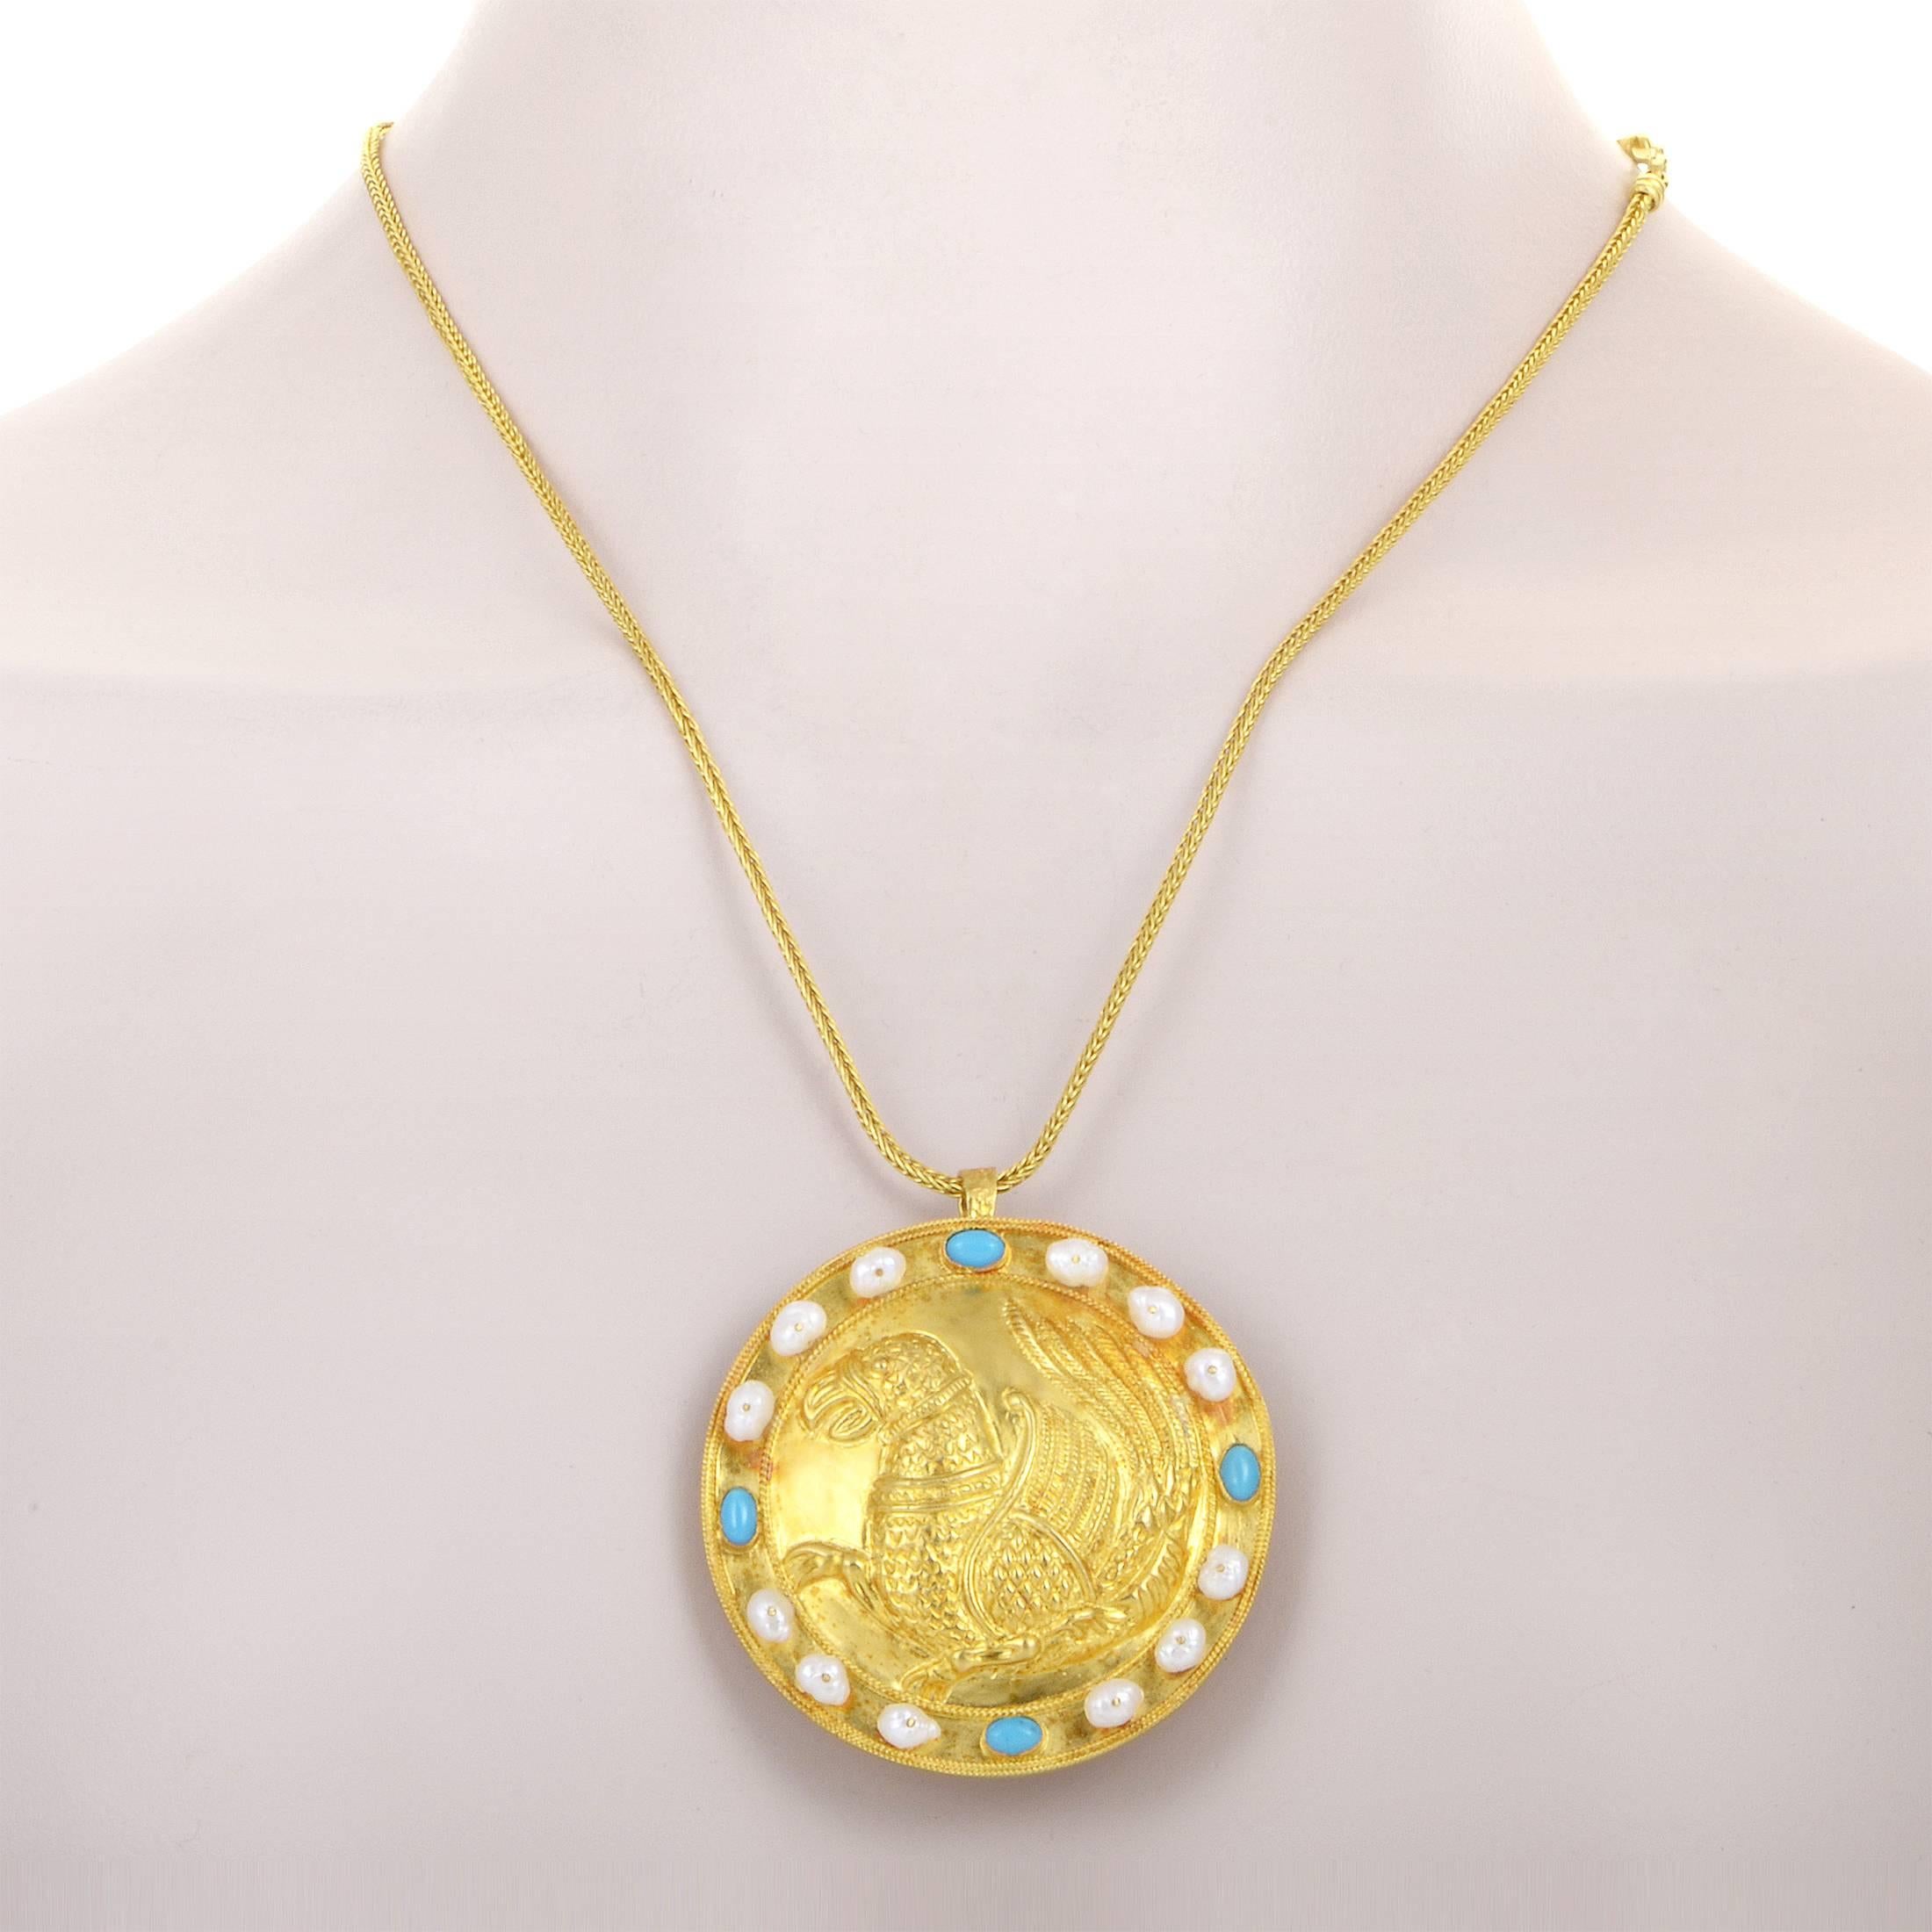 With an intriguing and delicate relief embellishing the wonderfully radiant surface of the 18K yellow gold pendant, this magnificent necklace from Ilias Lalaounis boasts an appealing blend of delightful pearls and gorgeous turquoise stones for an